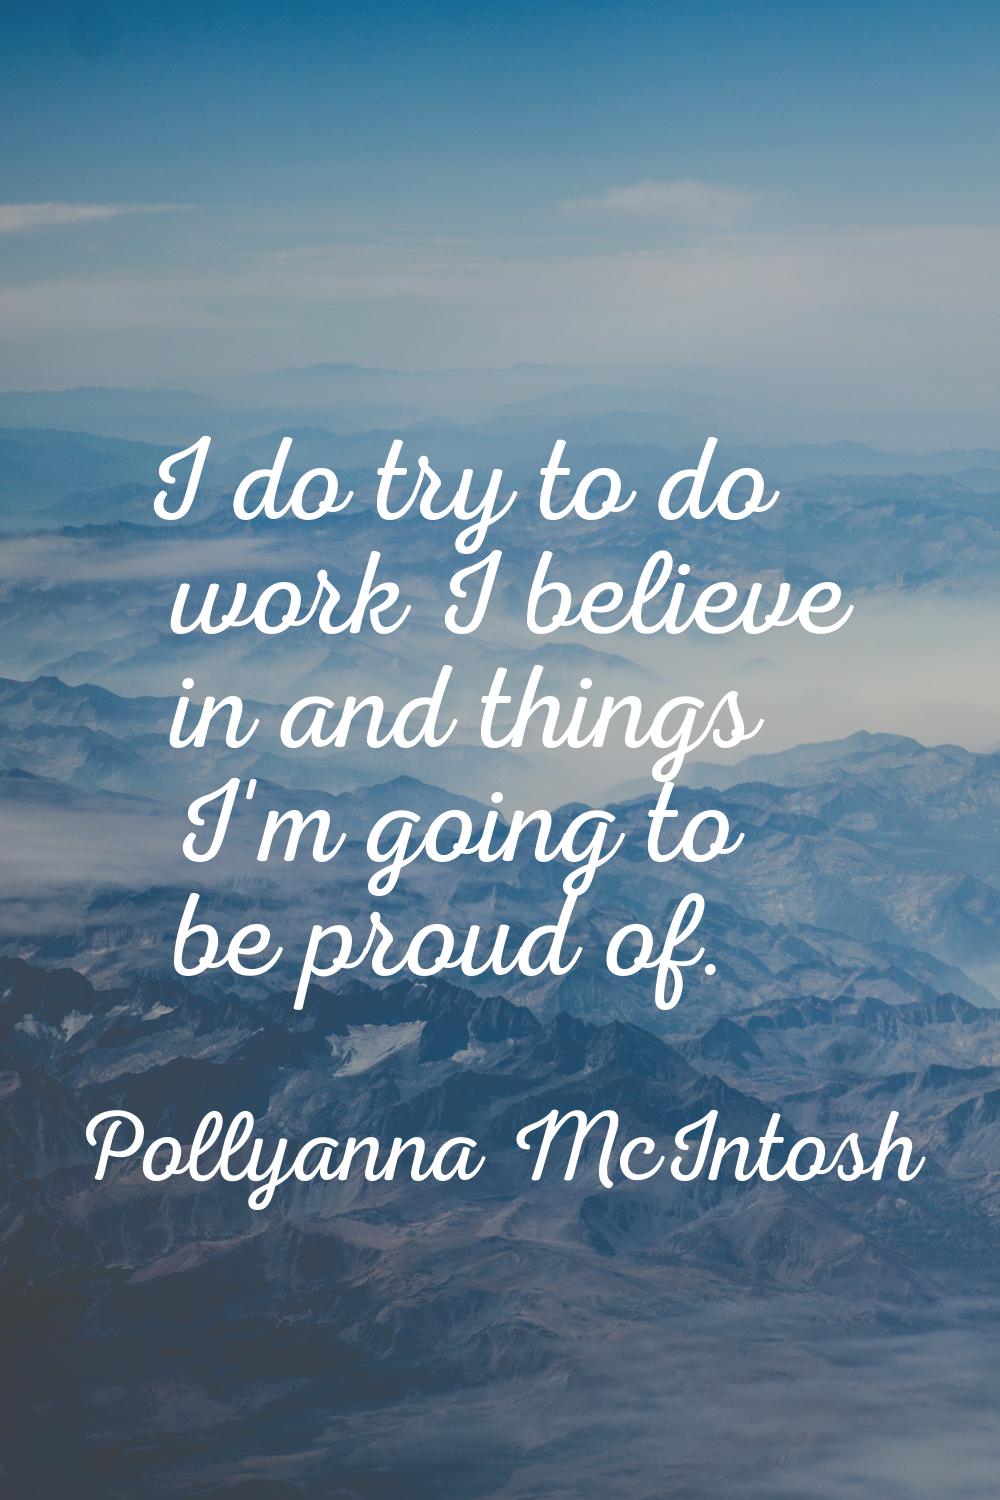 I do try to do work I believe in and things I'm going to be proud of.